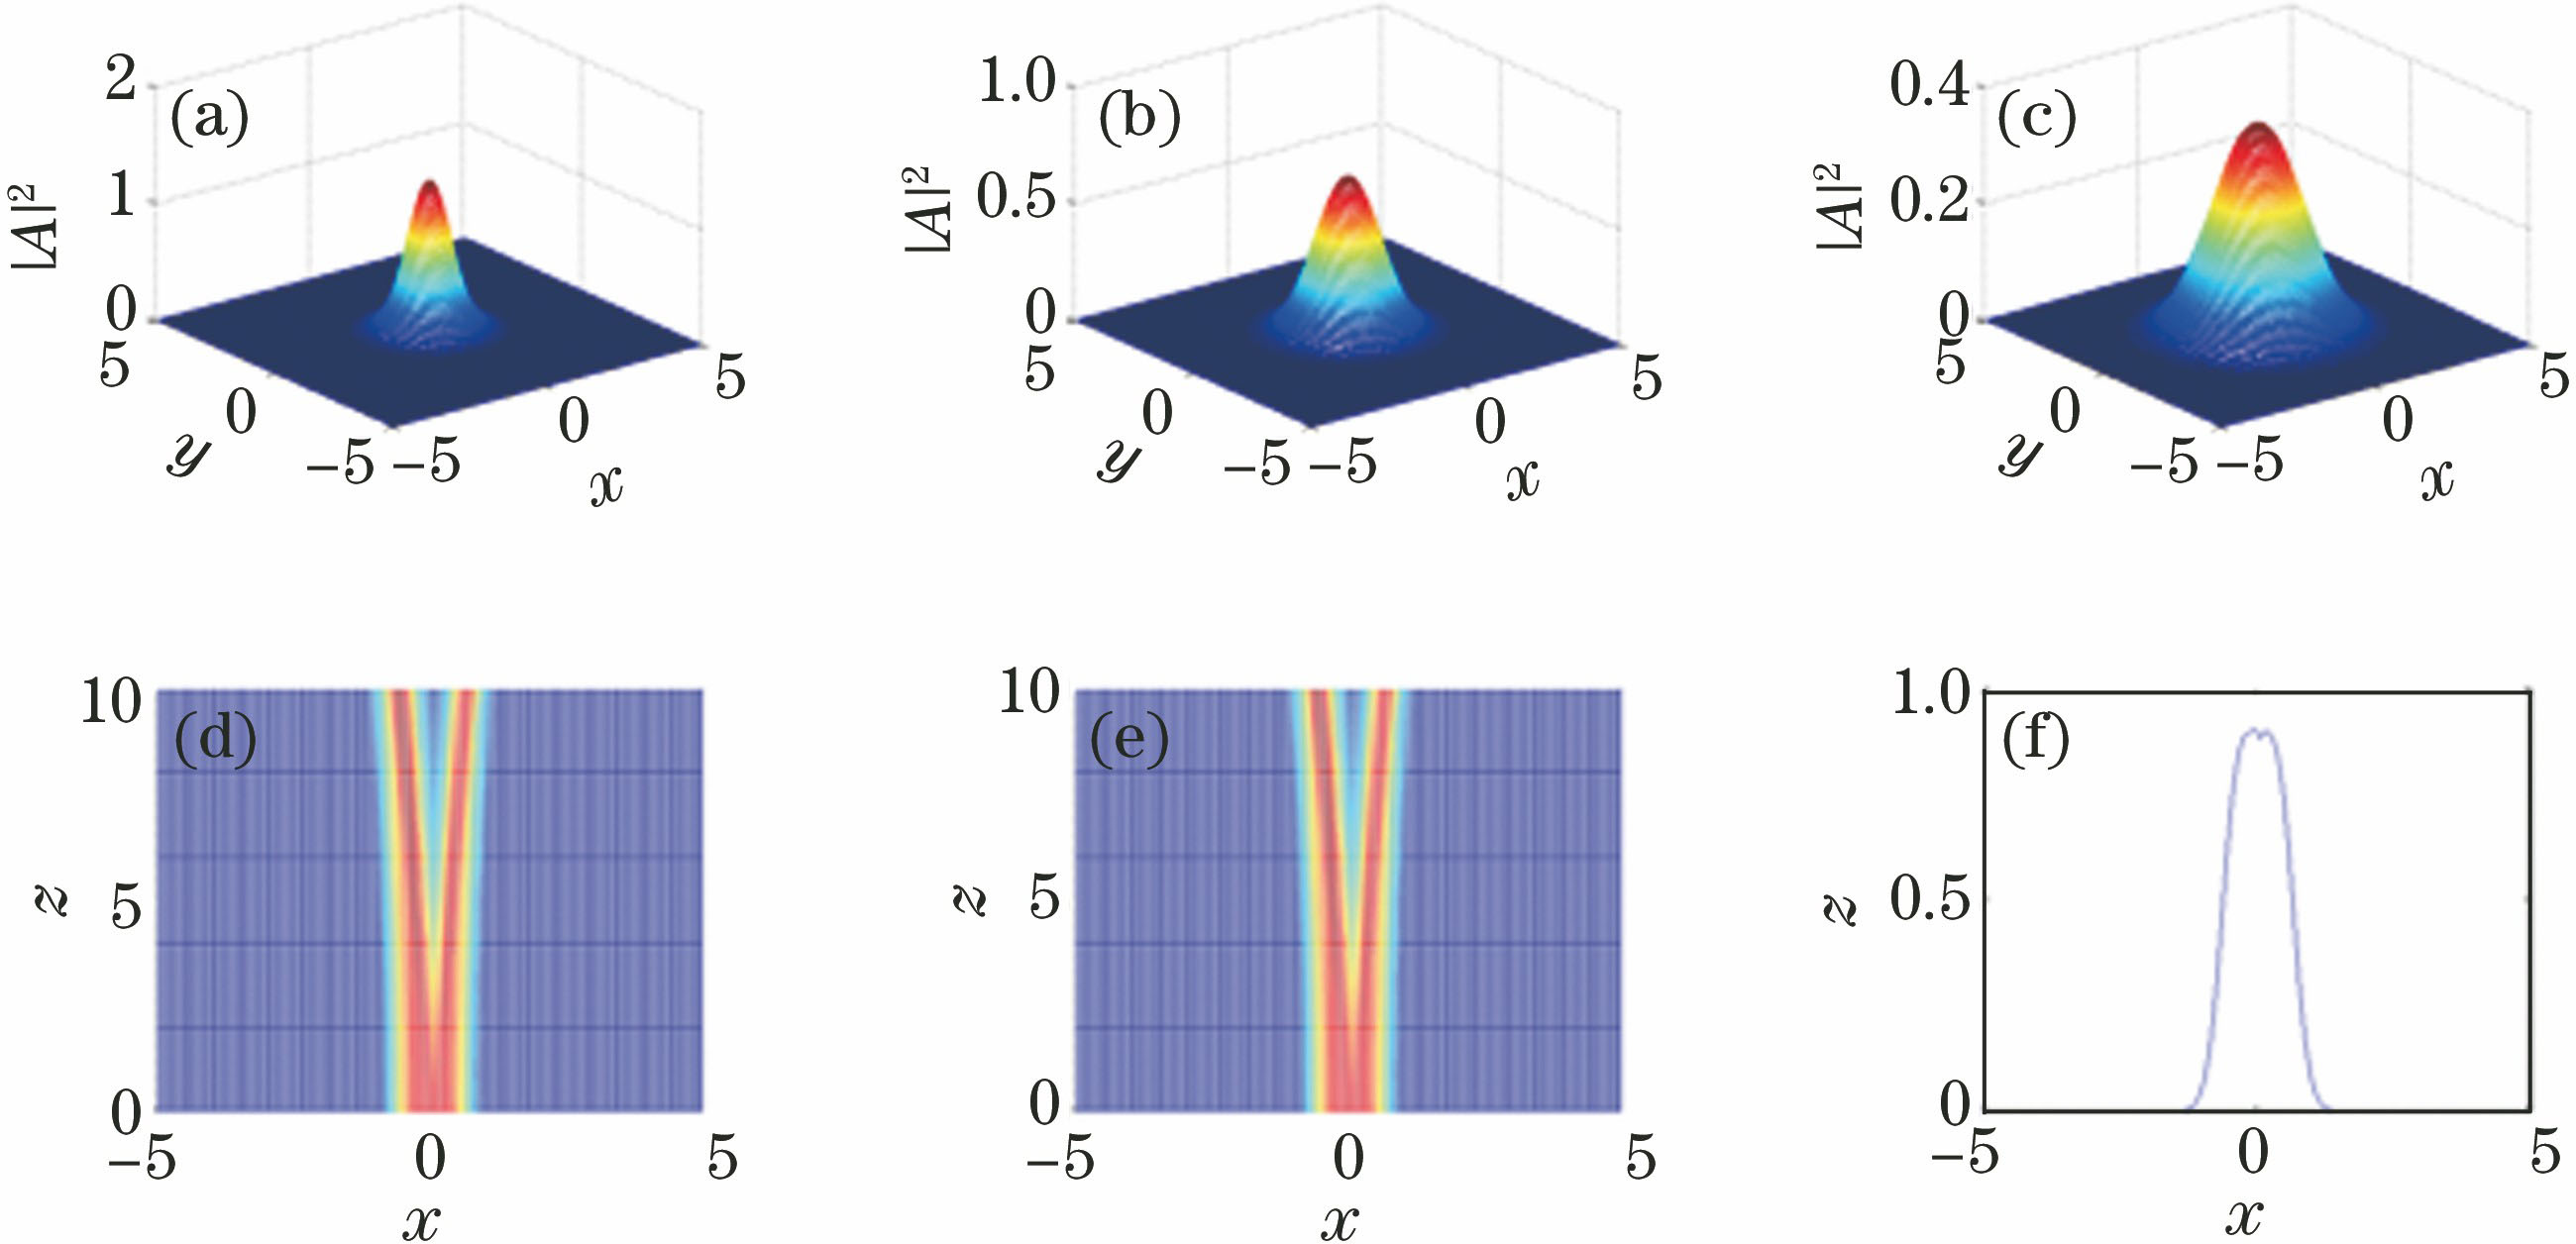 Intensity distributions of bright soliton at z=(a) 0, (b) 5, and (c) 9; (d) intensity contour plot in the x-z plane; (e) intensity contour plot in the x-y plane; (f) corresponding intensity contour at z=8, other parameters are a=d=1, b=0.25, c=8